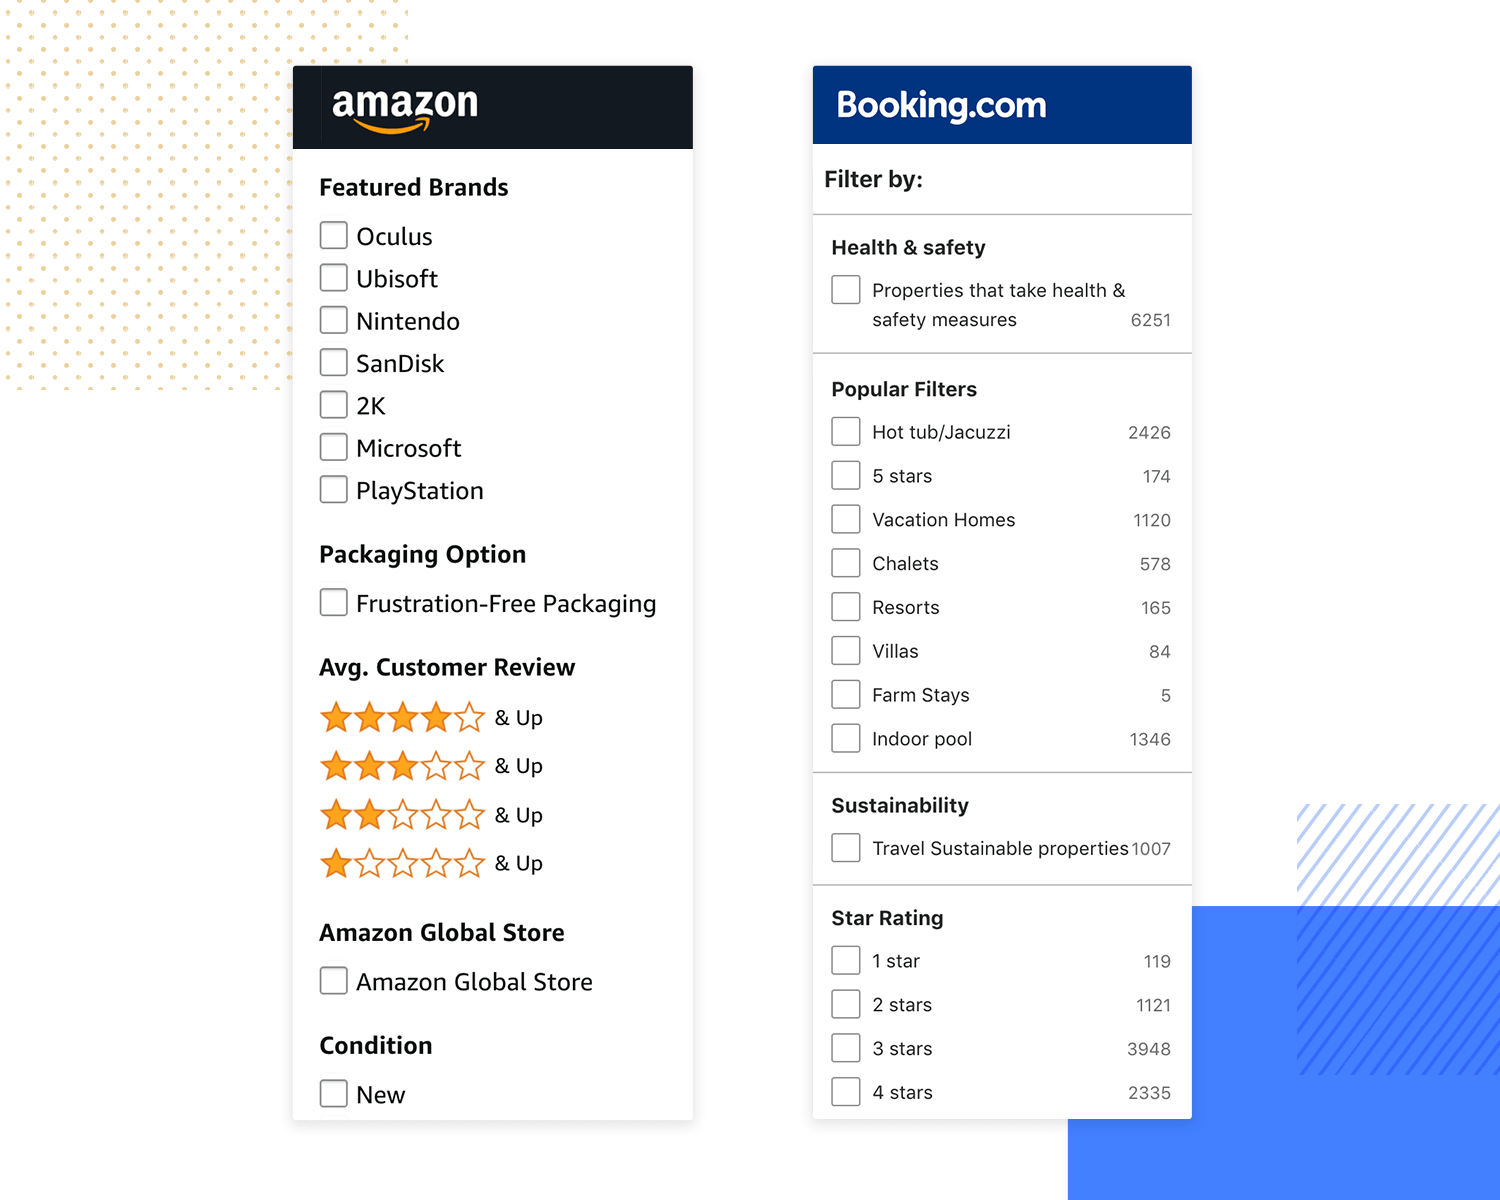 examples of search systems for great information architecture - booking.com and amazon